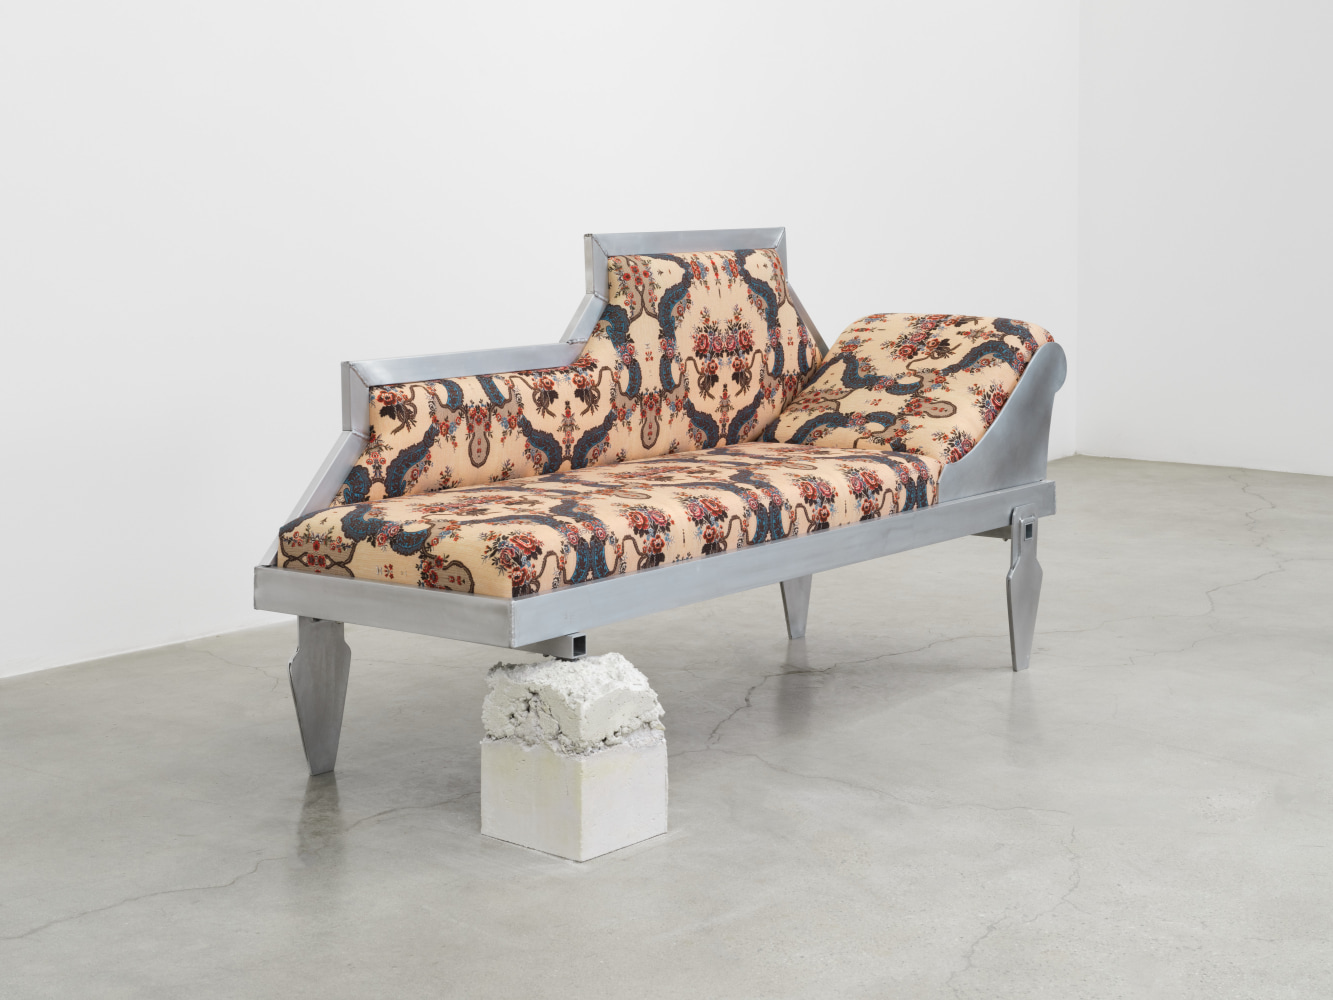 Carla Edwards, Chaise for Ghosts (Mirror), 2023